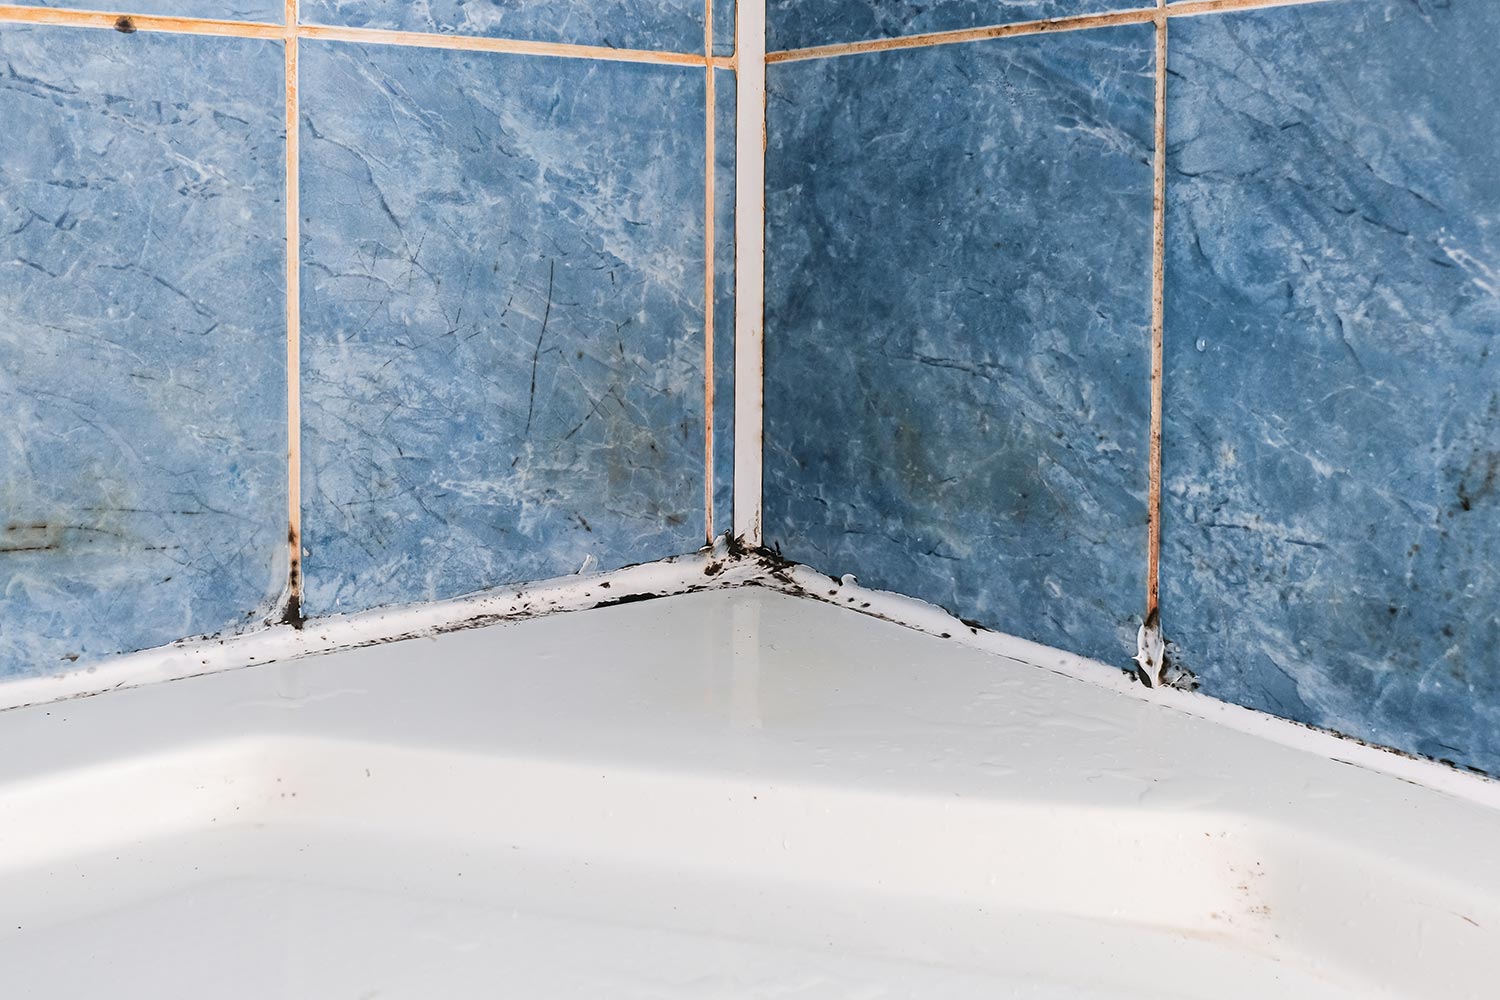 Mold fungus and rust growing in tile joints in damp poorly ventilated bathroom